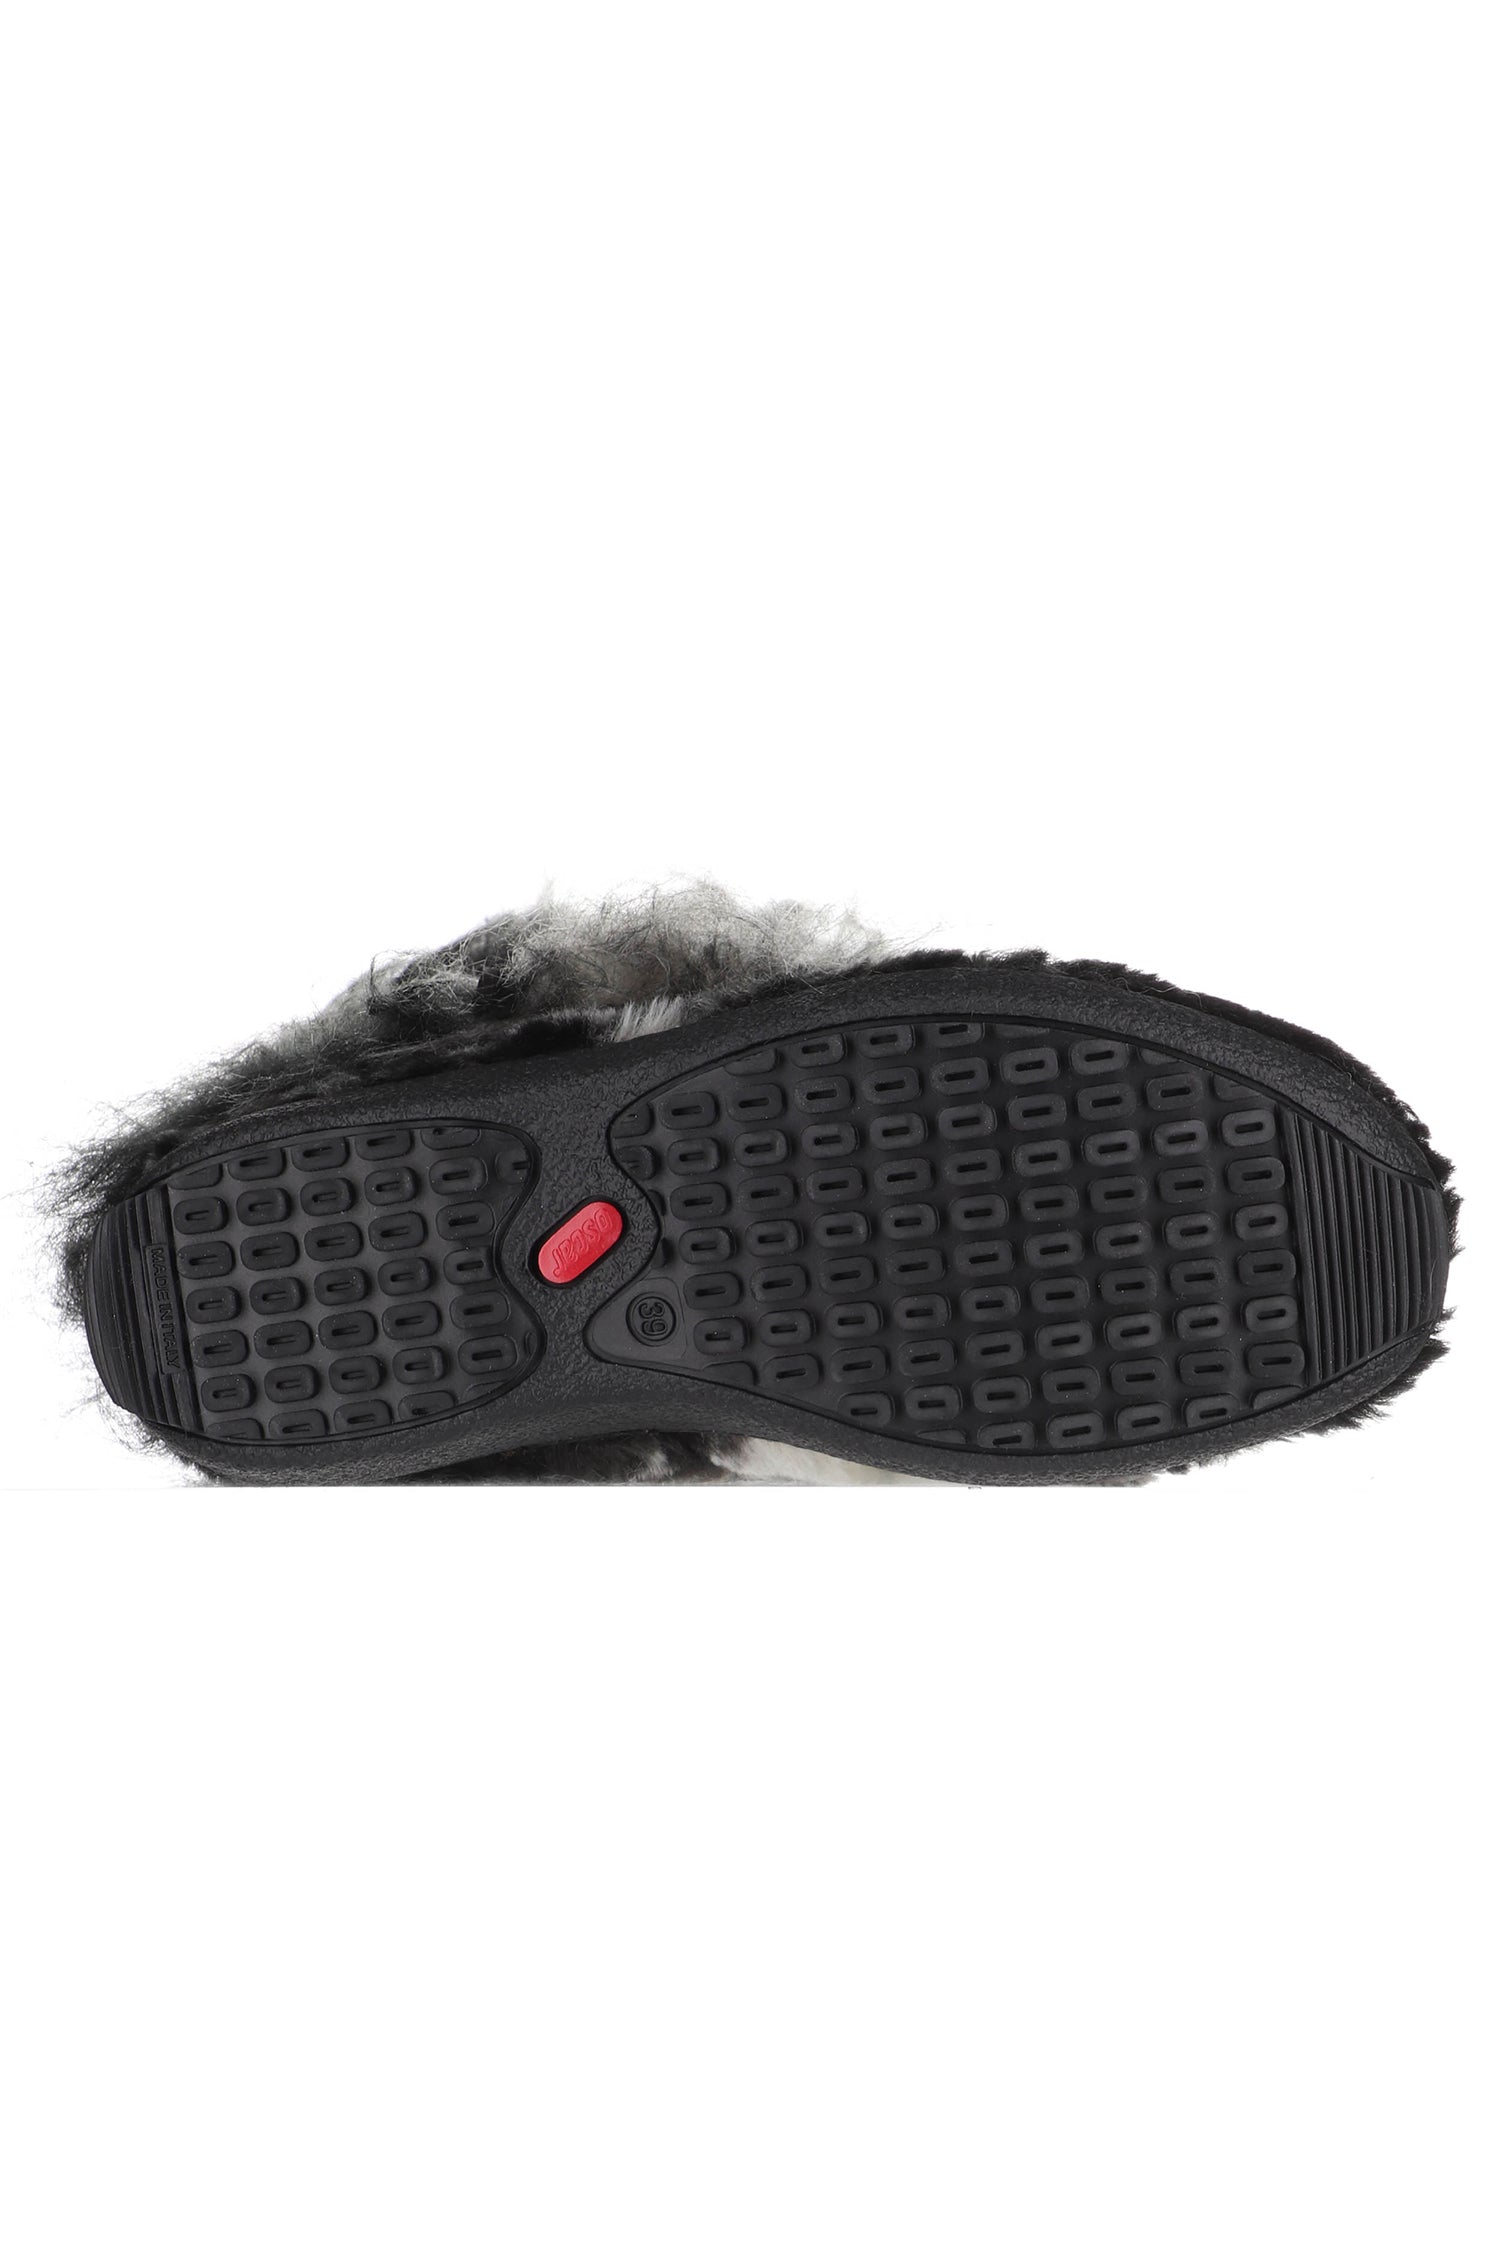 Bottom sole, black with Anti-slip design and a red button signature